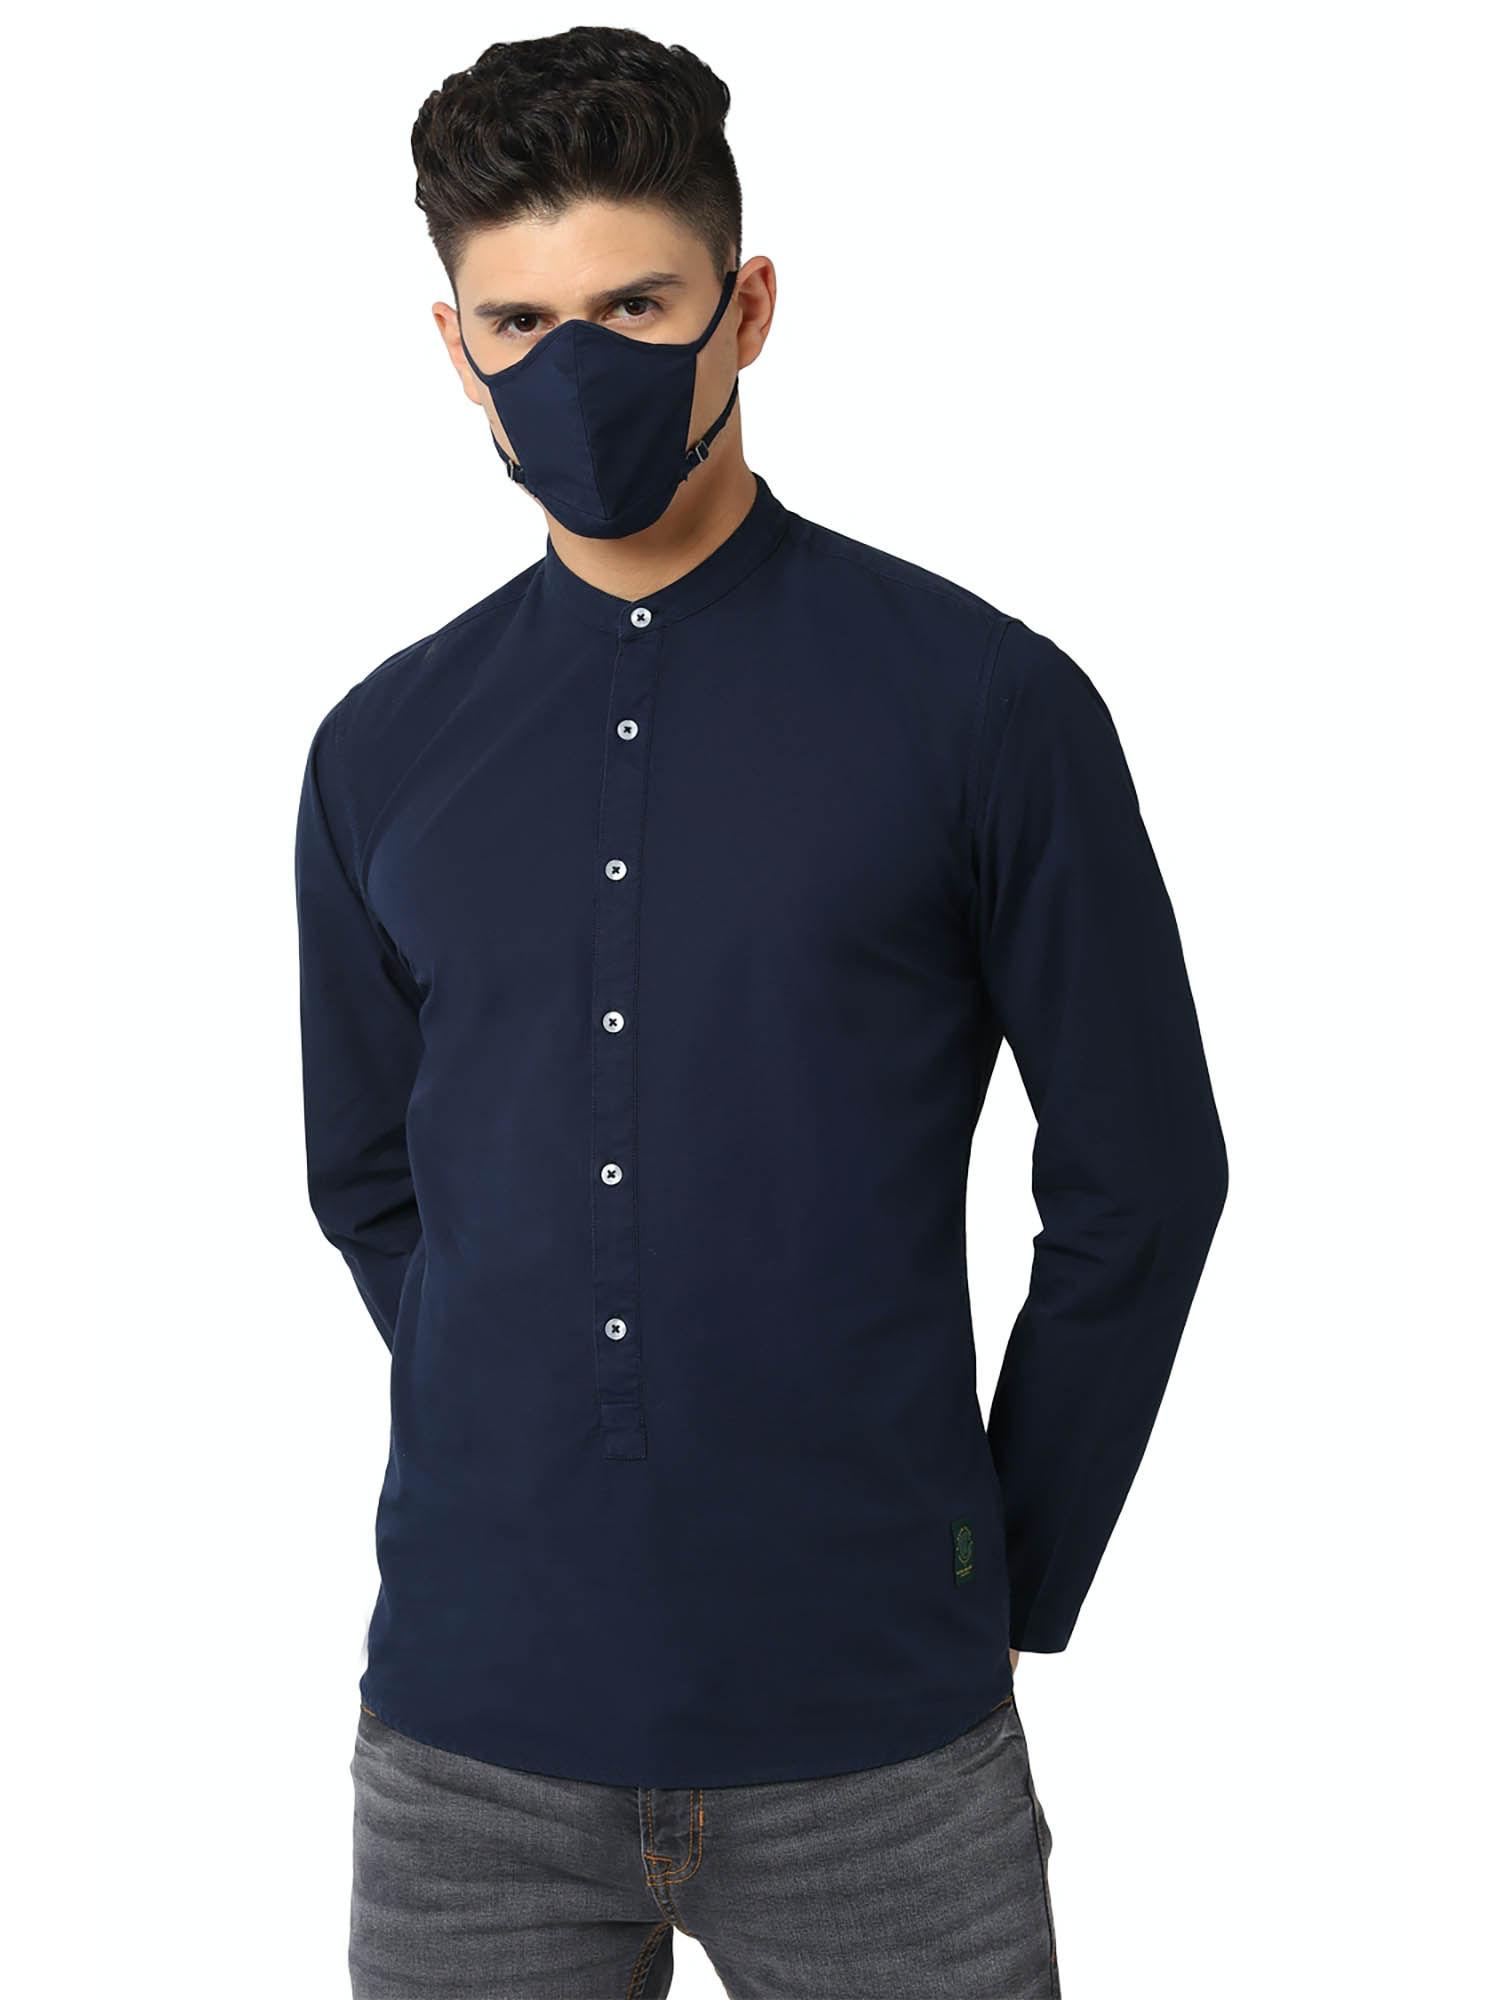 navy blue solid casual shirt with mask